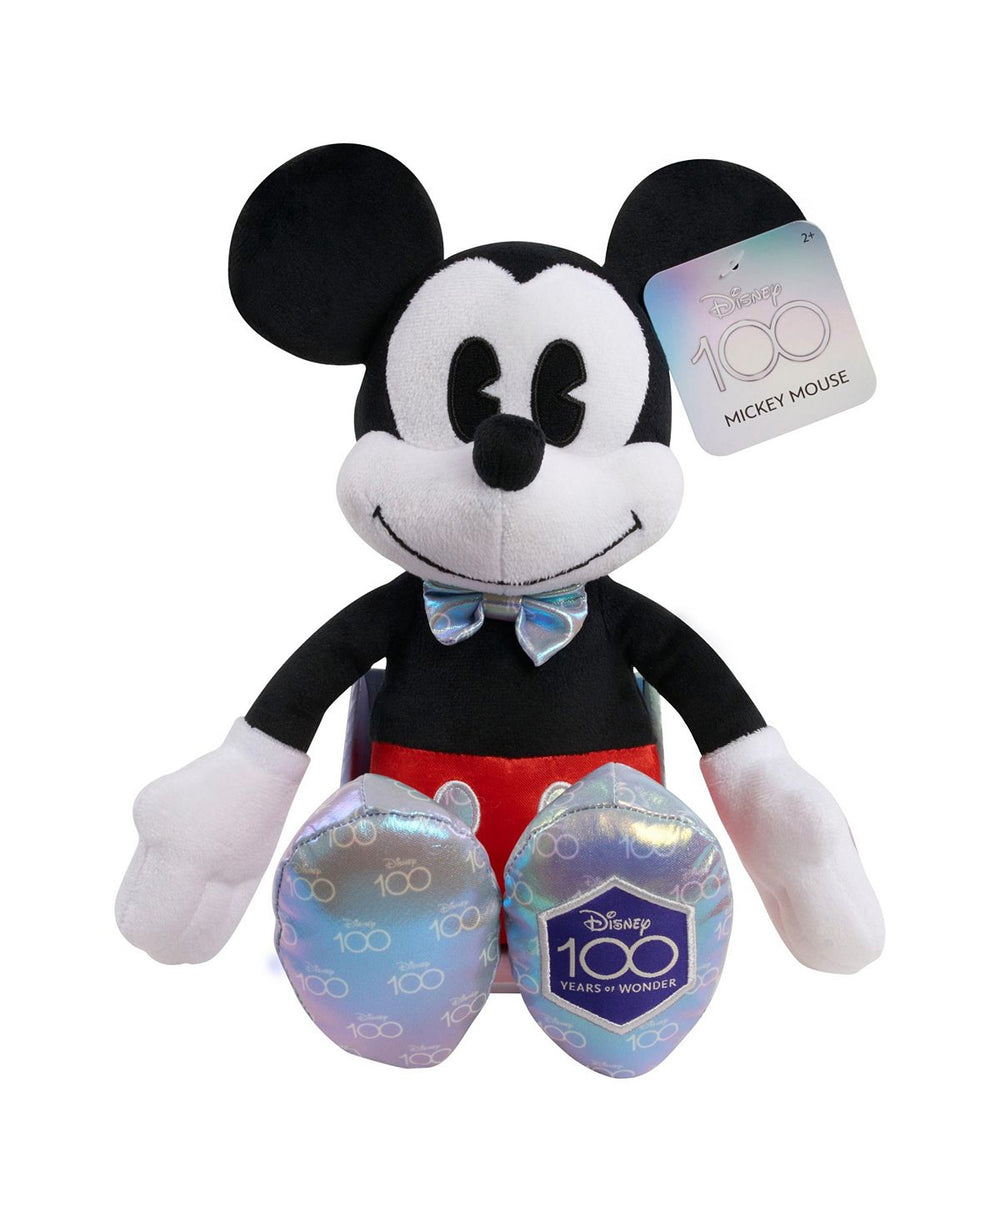 Disney100 17-inch Mickey Mouse Collector Plush - Platinum Bowtie and Holographic Shoes